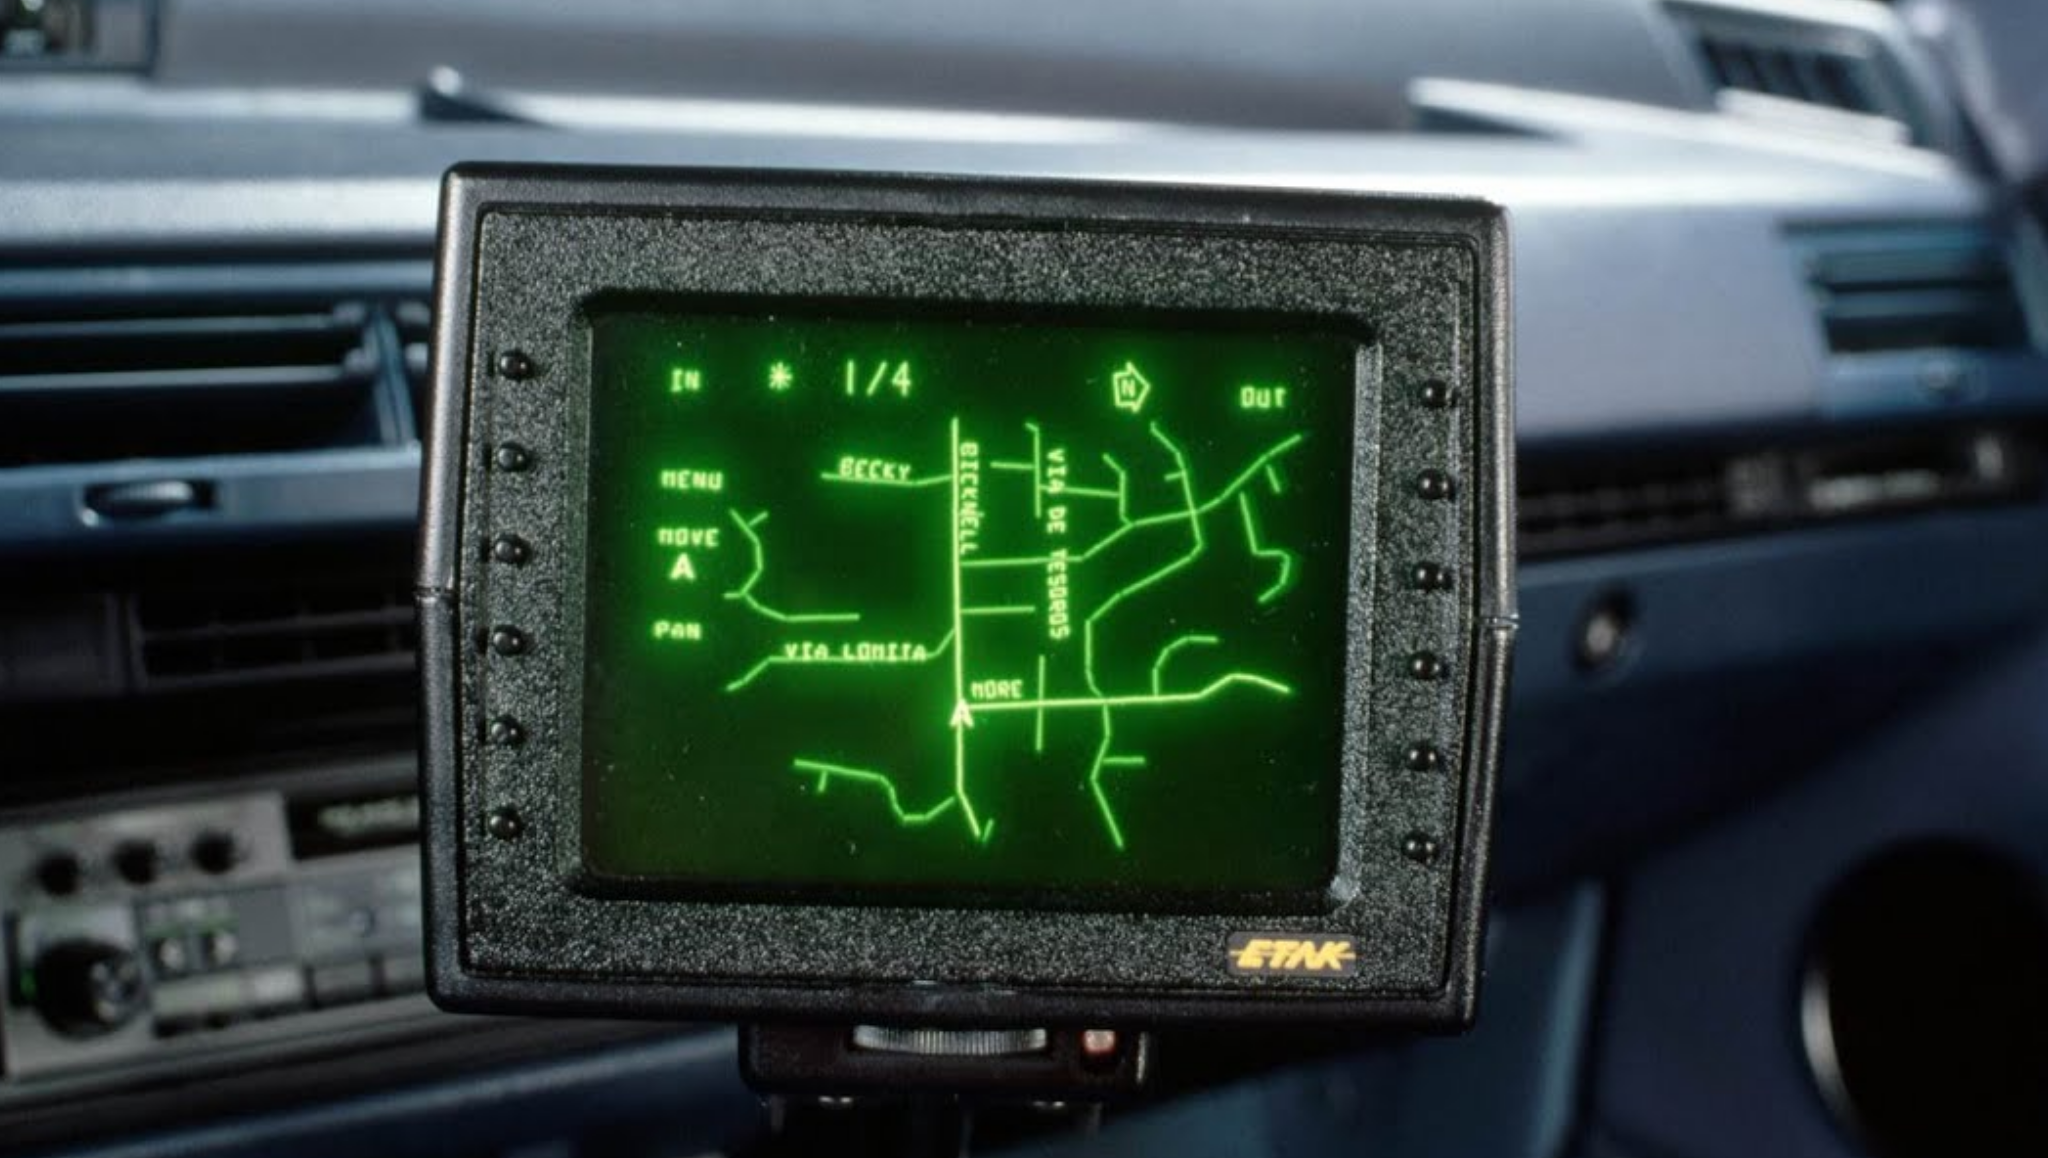 Car Navigation Systems Before GPS Were Wonders of Technology